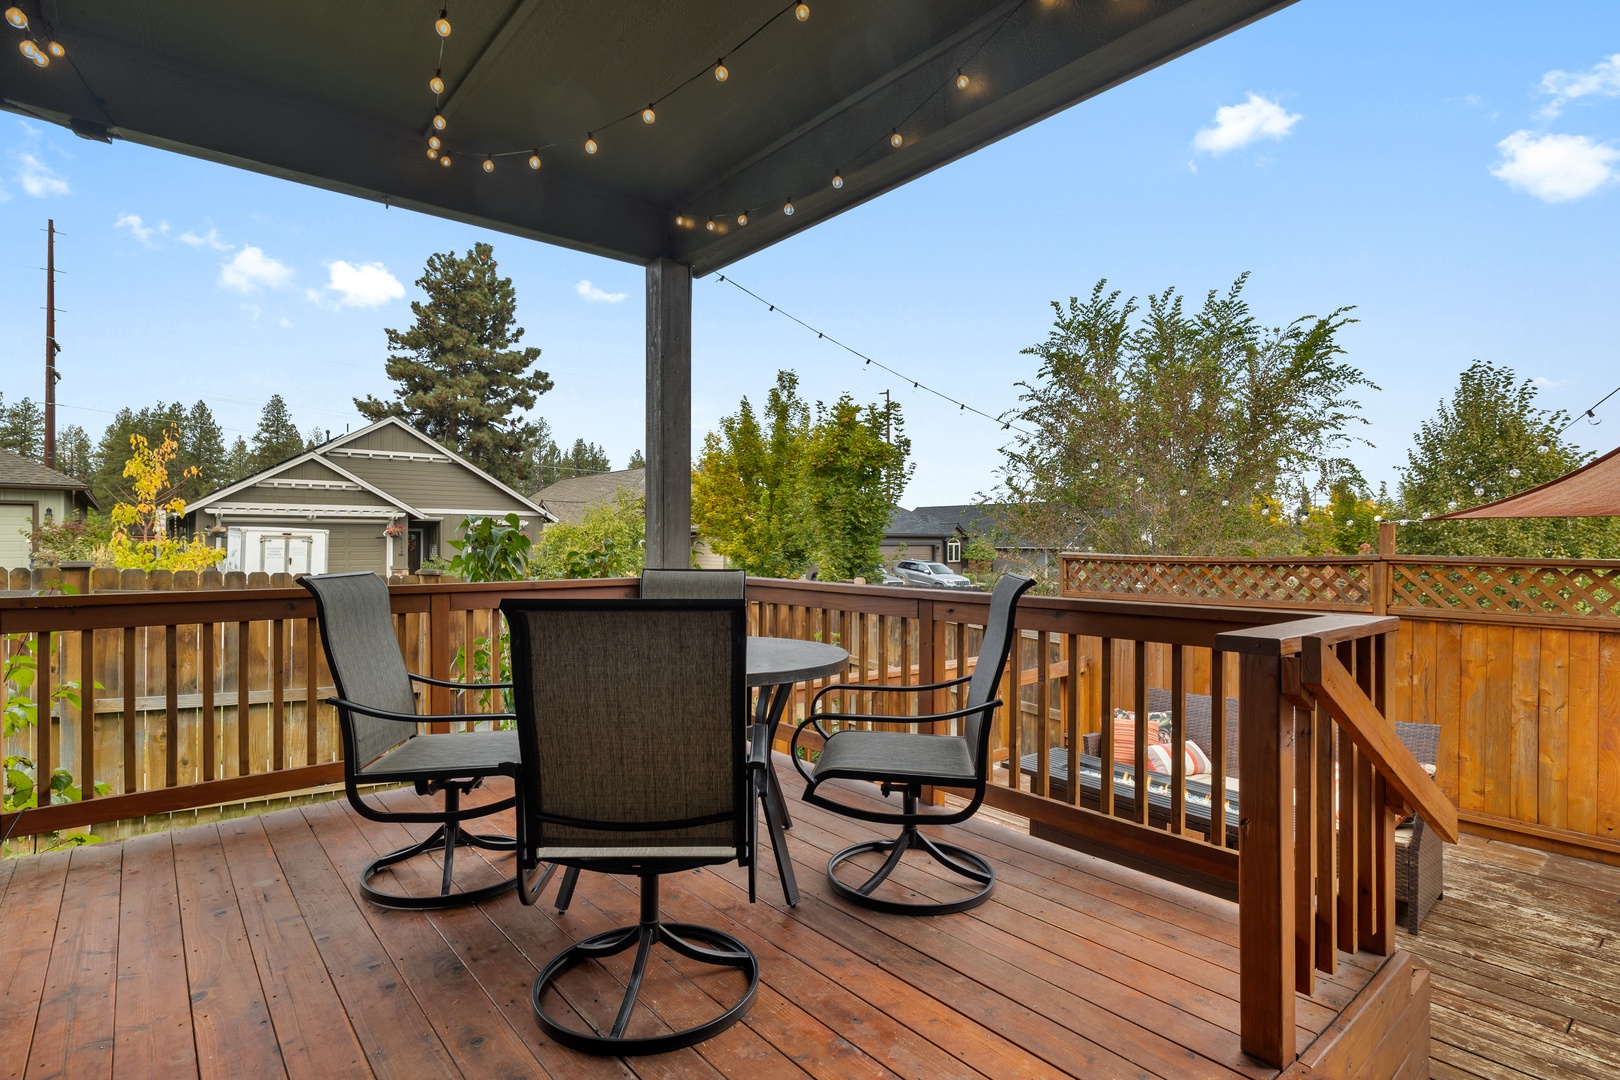 Lounge & dine at the back deck’s outdoor dining set, with seating for 4